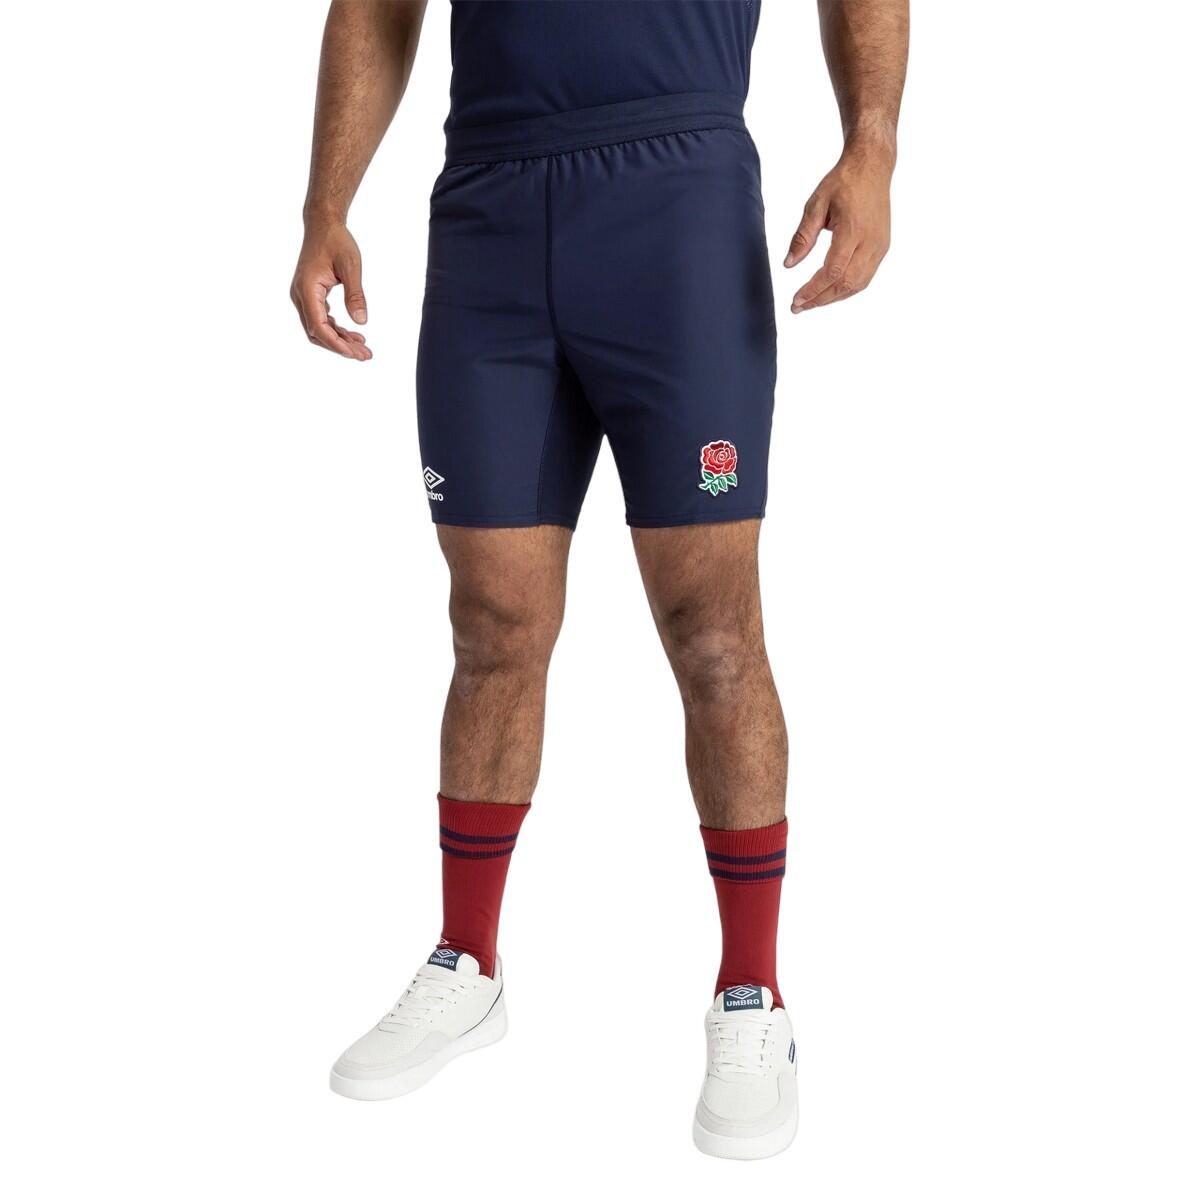 Mens 23/24 Alternate England Rugby Replica Shorts (Navy Blue/White/Red) 3/4